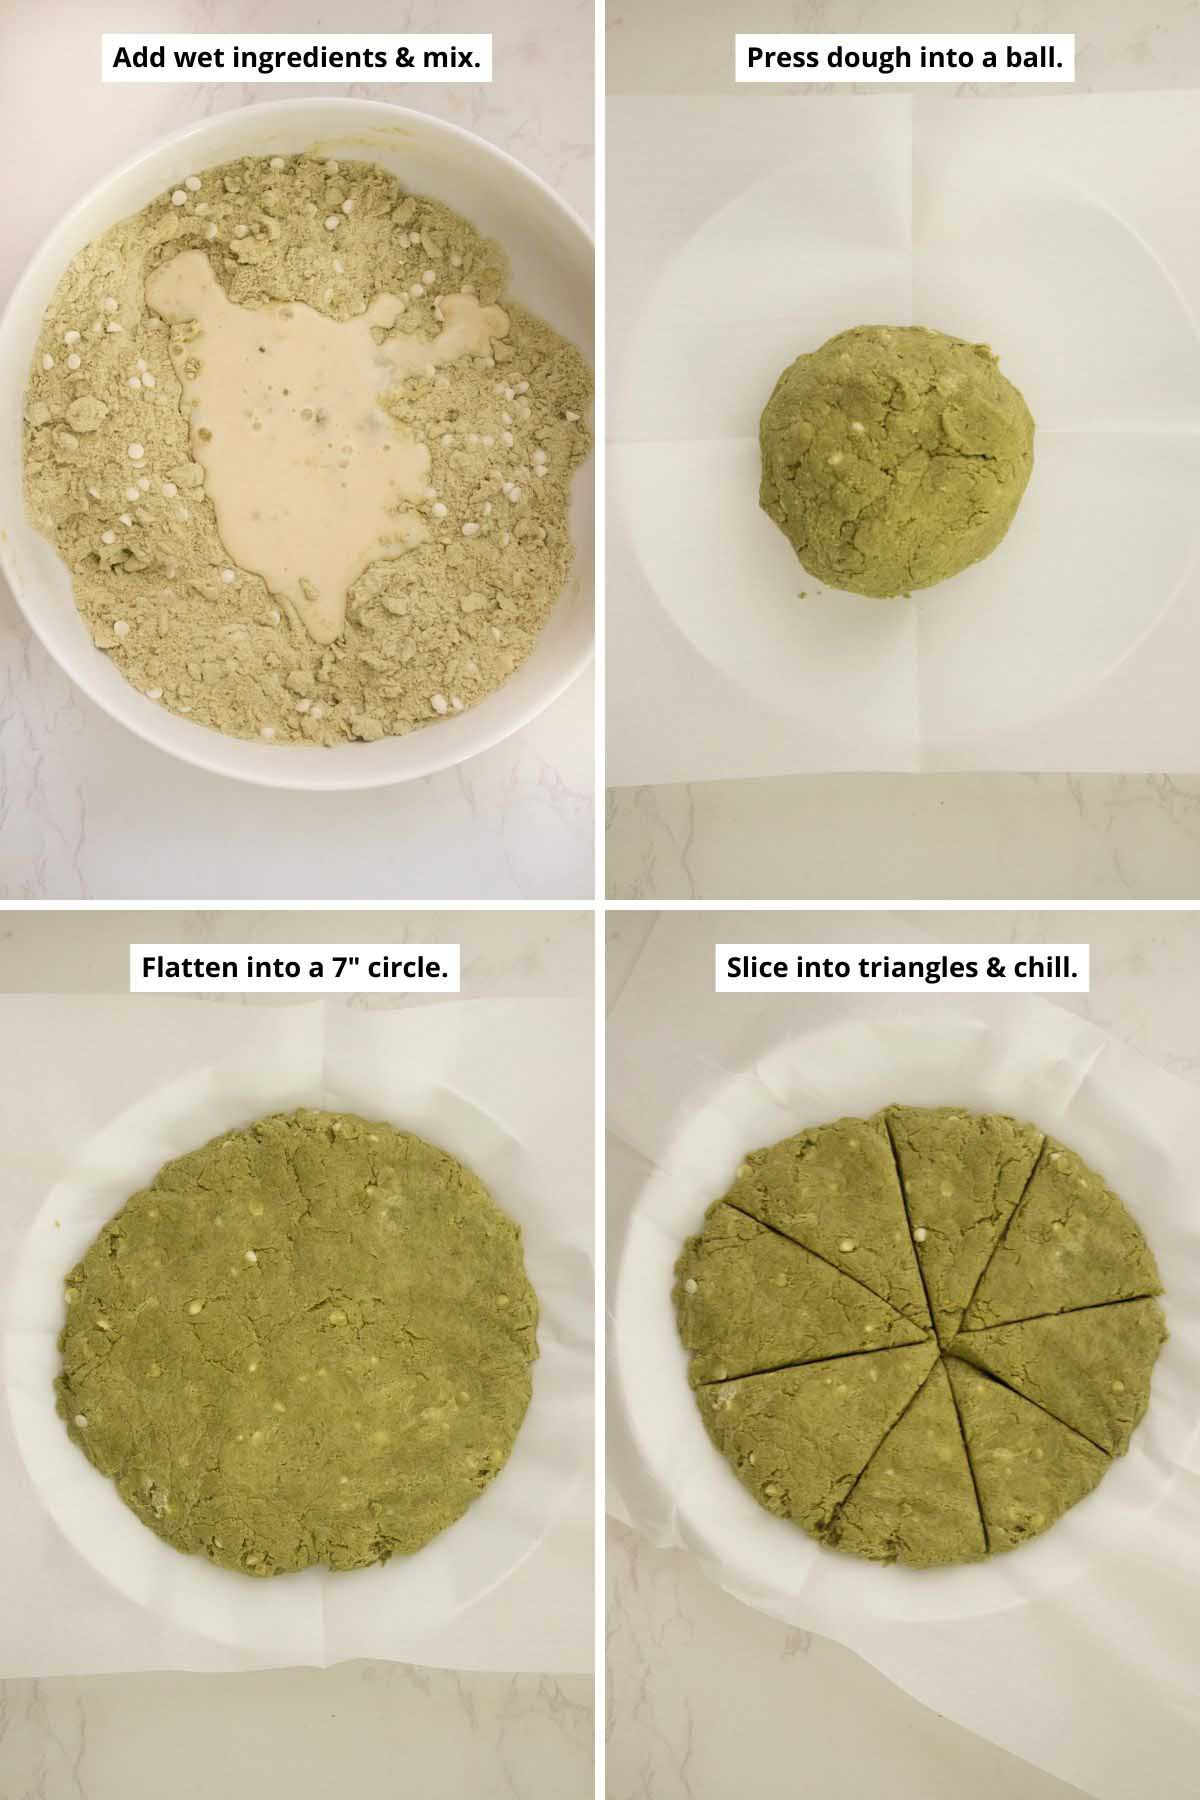 image collage showing adding the wet ingredients to the dry, the dough ball after mixing and after pressing and then slicing into triangles